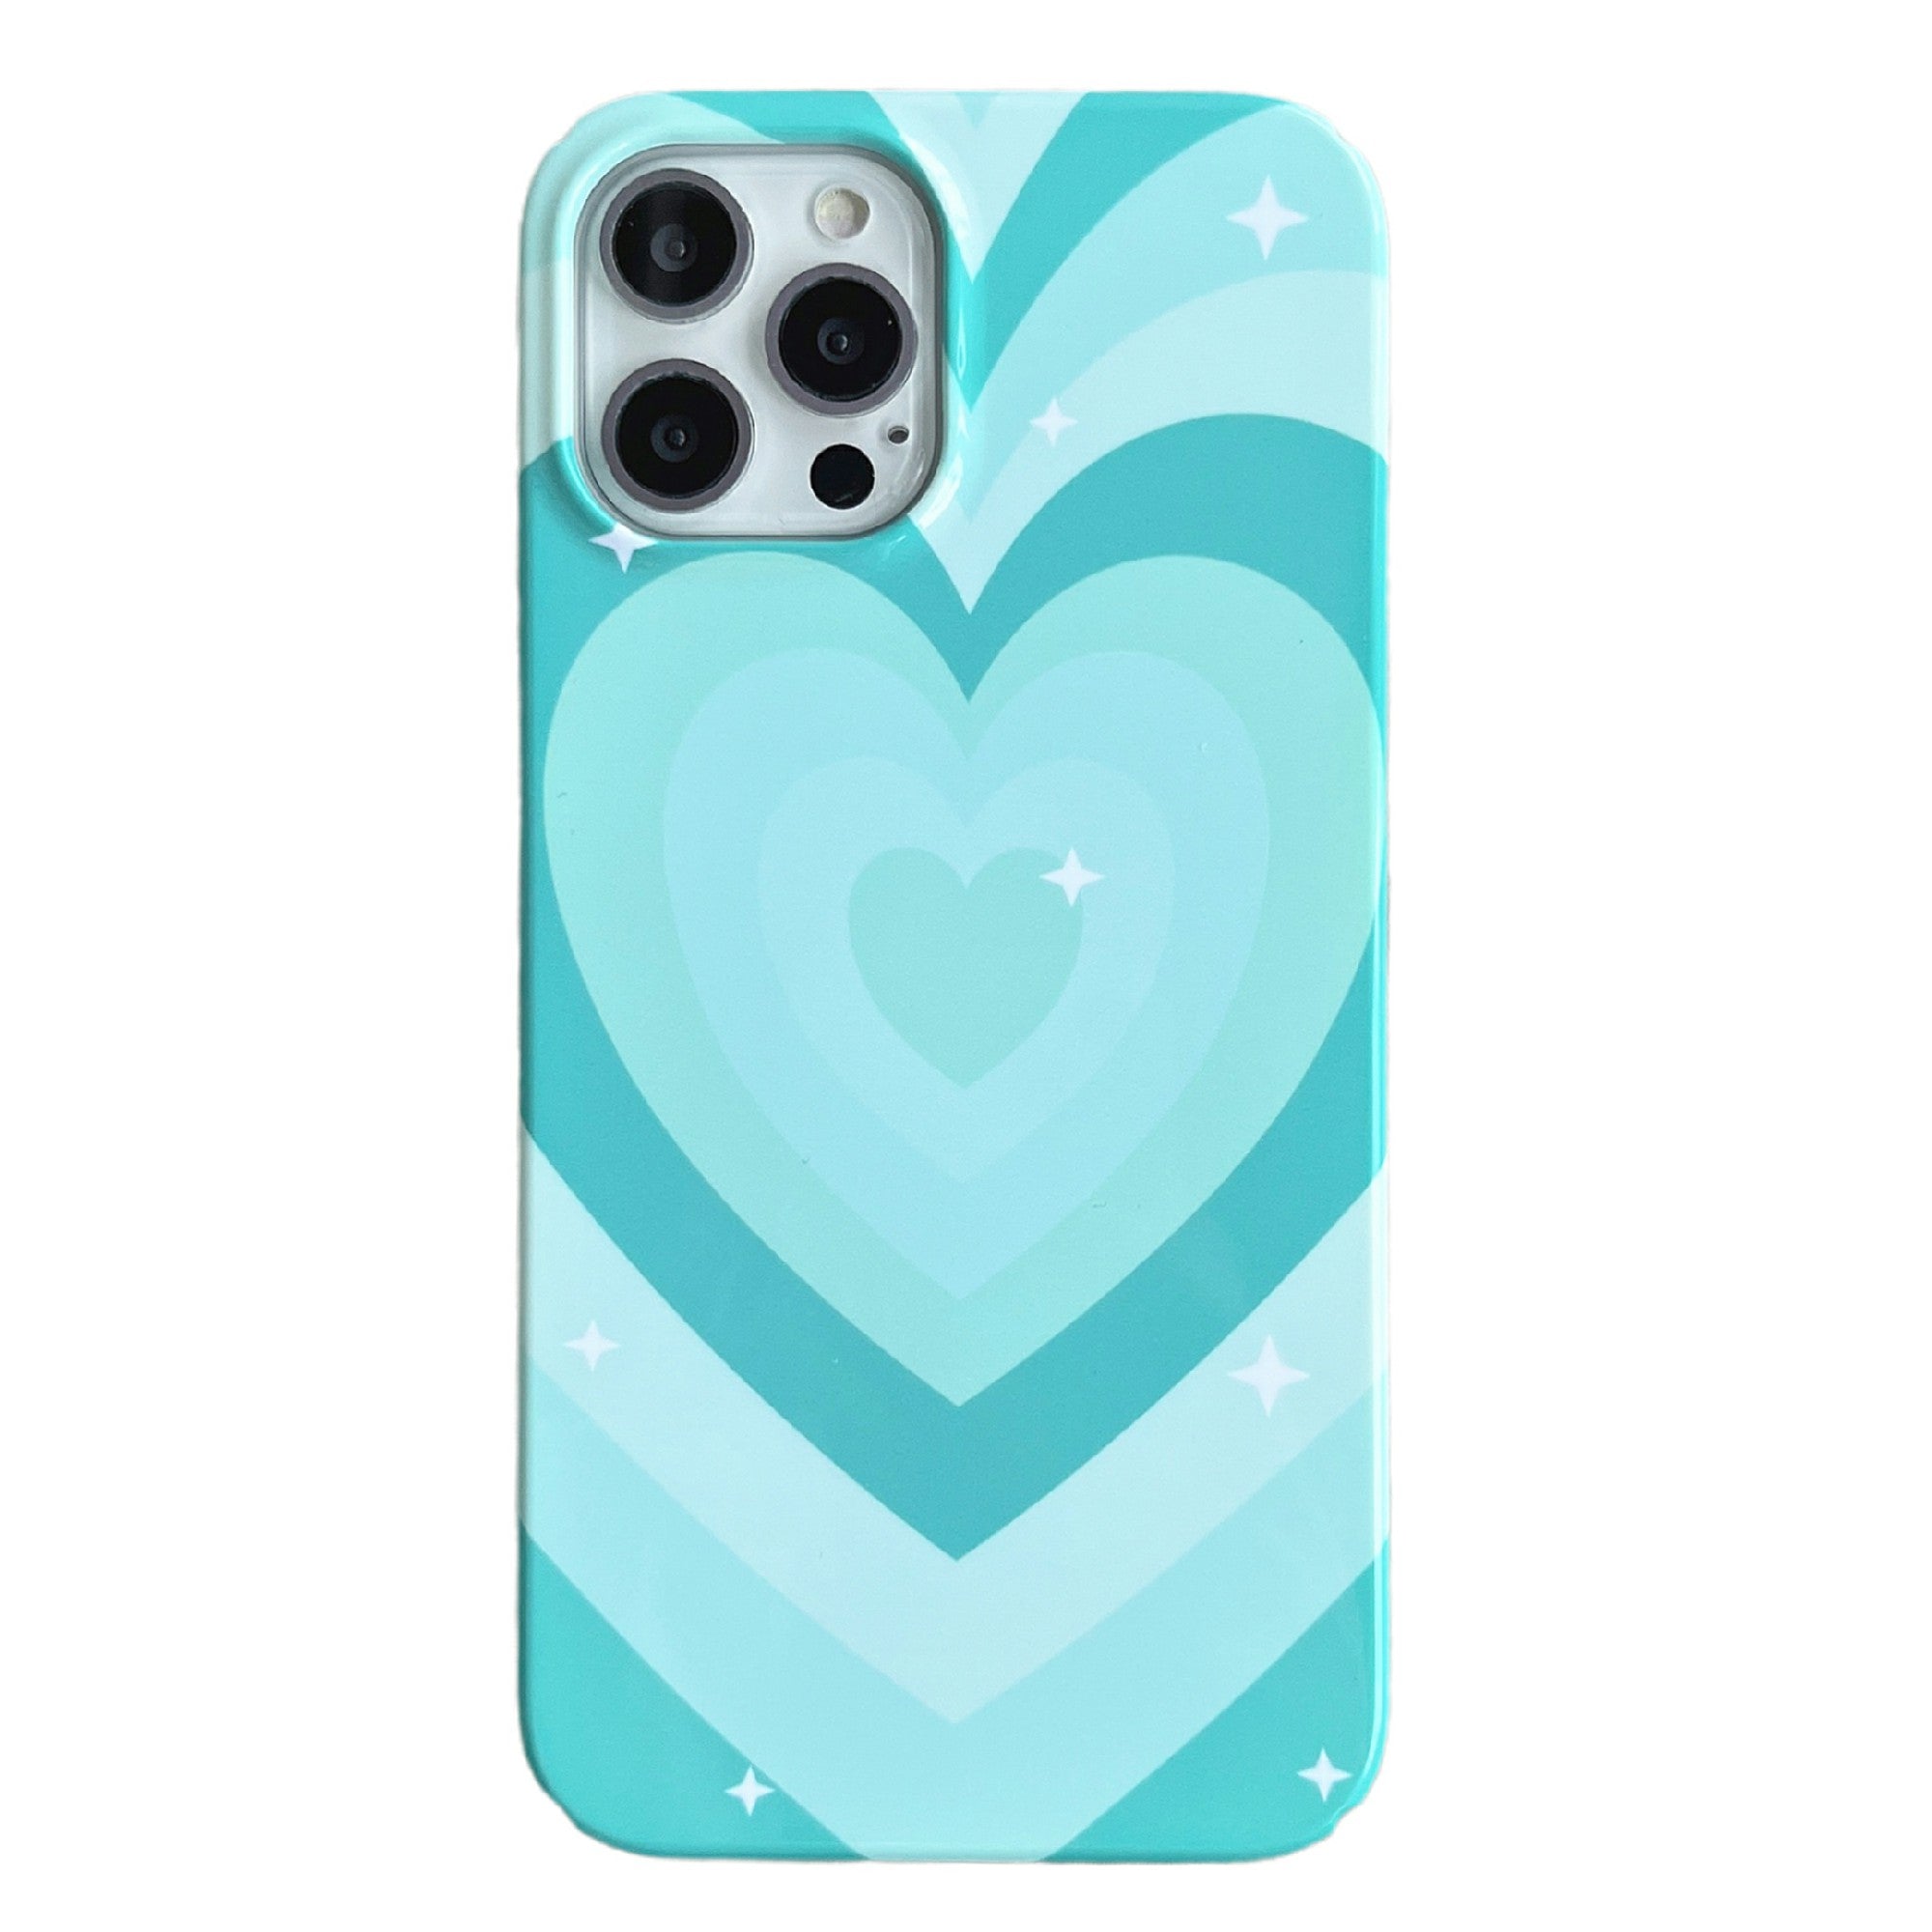 Hard PC Phone Cover for iPhone 12 Pro 6.1 inch Pattern Printing Anti-Drop Glossy Phone Case - Mint Green Heart